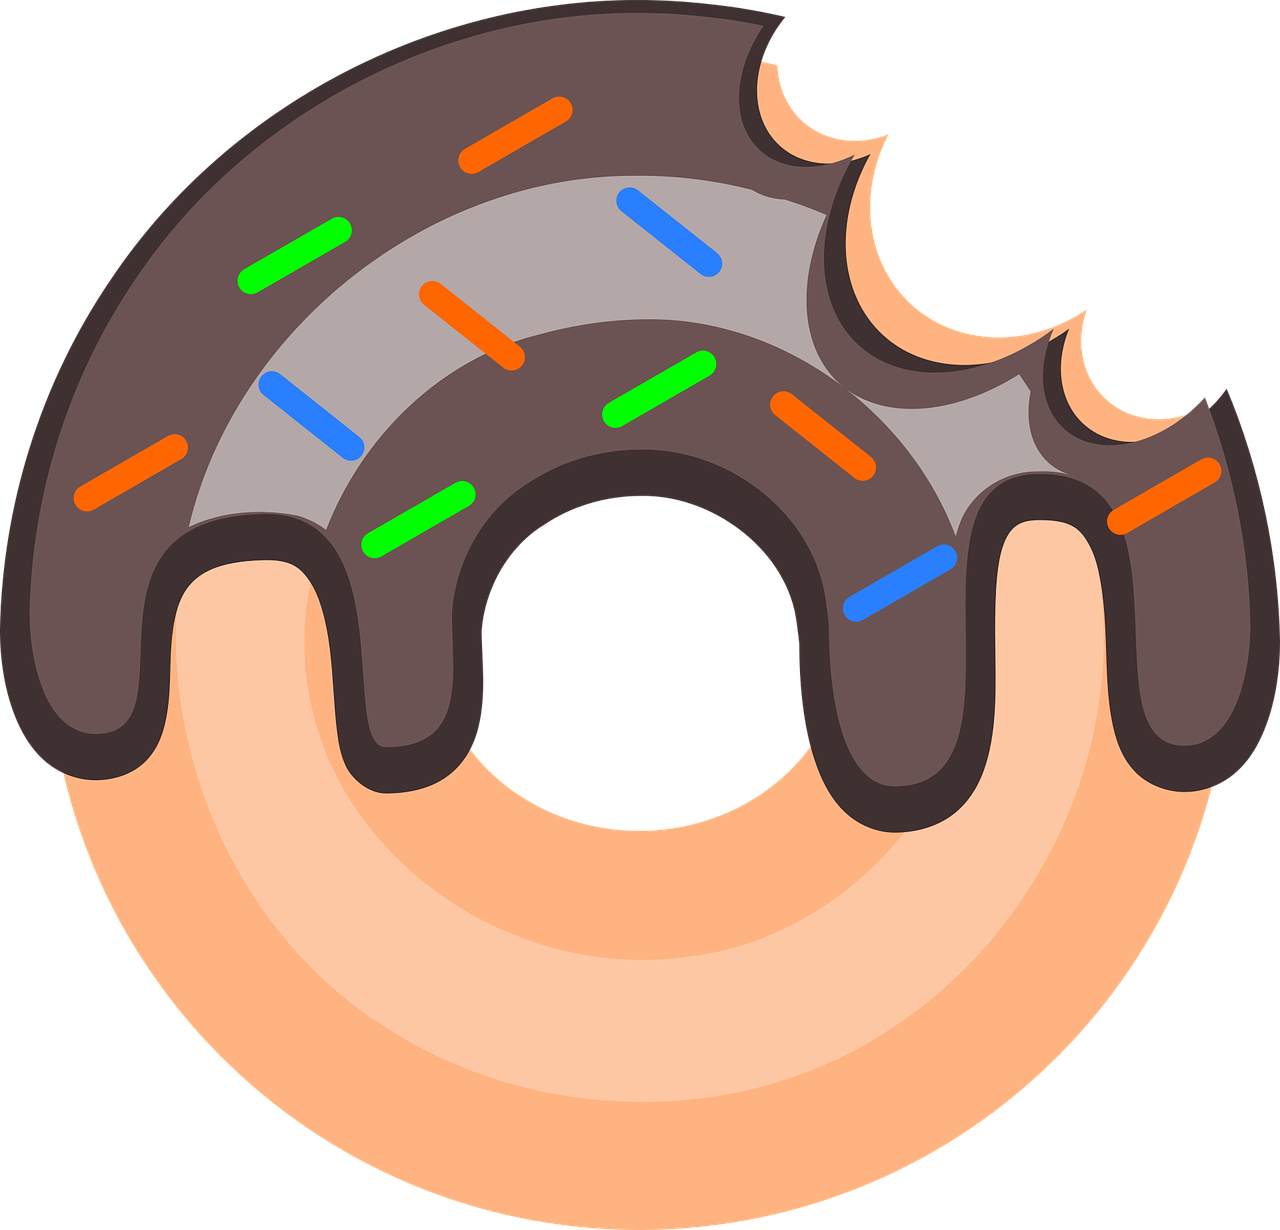 a donut with chocolate icing and sprinkles, a digital rendering, by Winona Nelson, pixabay, flat icon, black!!!!! background, full color illustration, cartoon style illustration